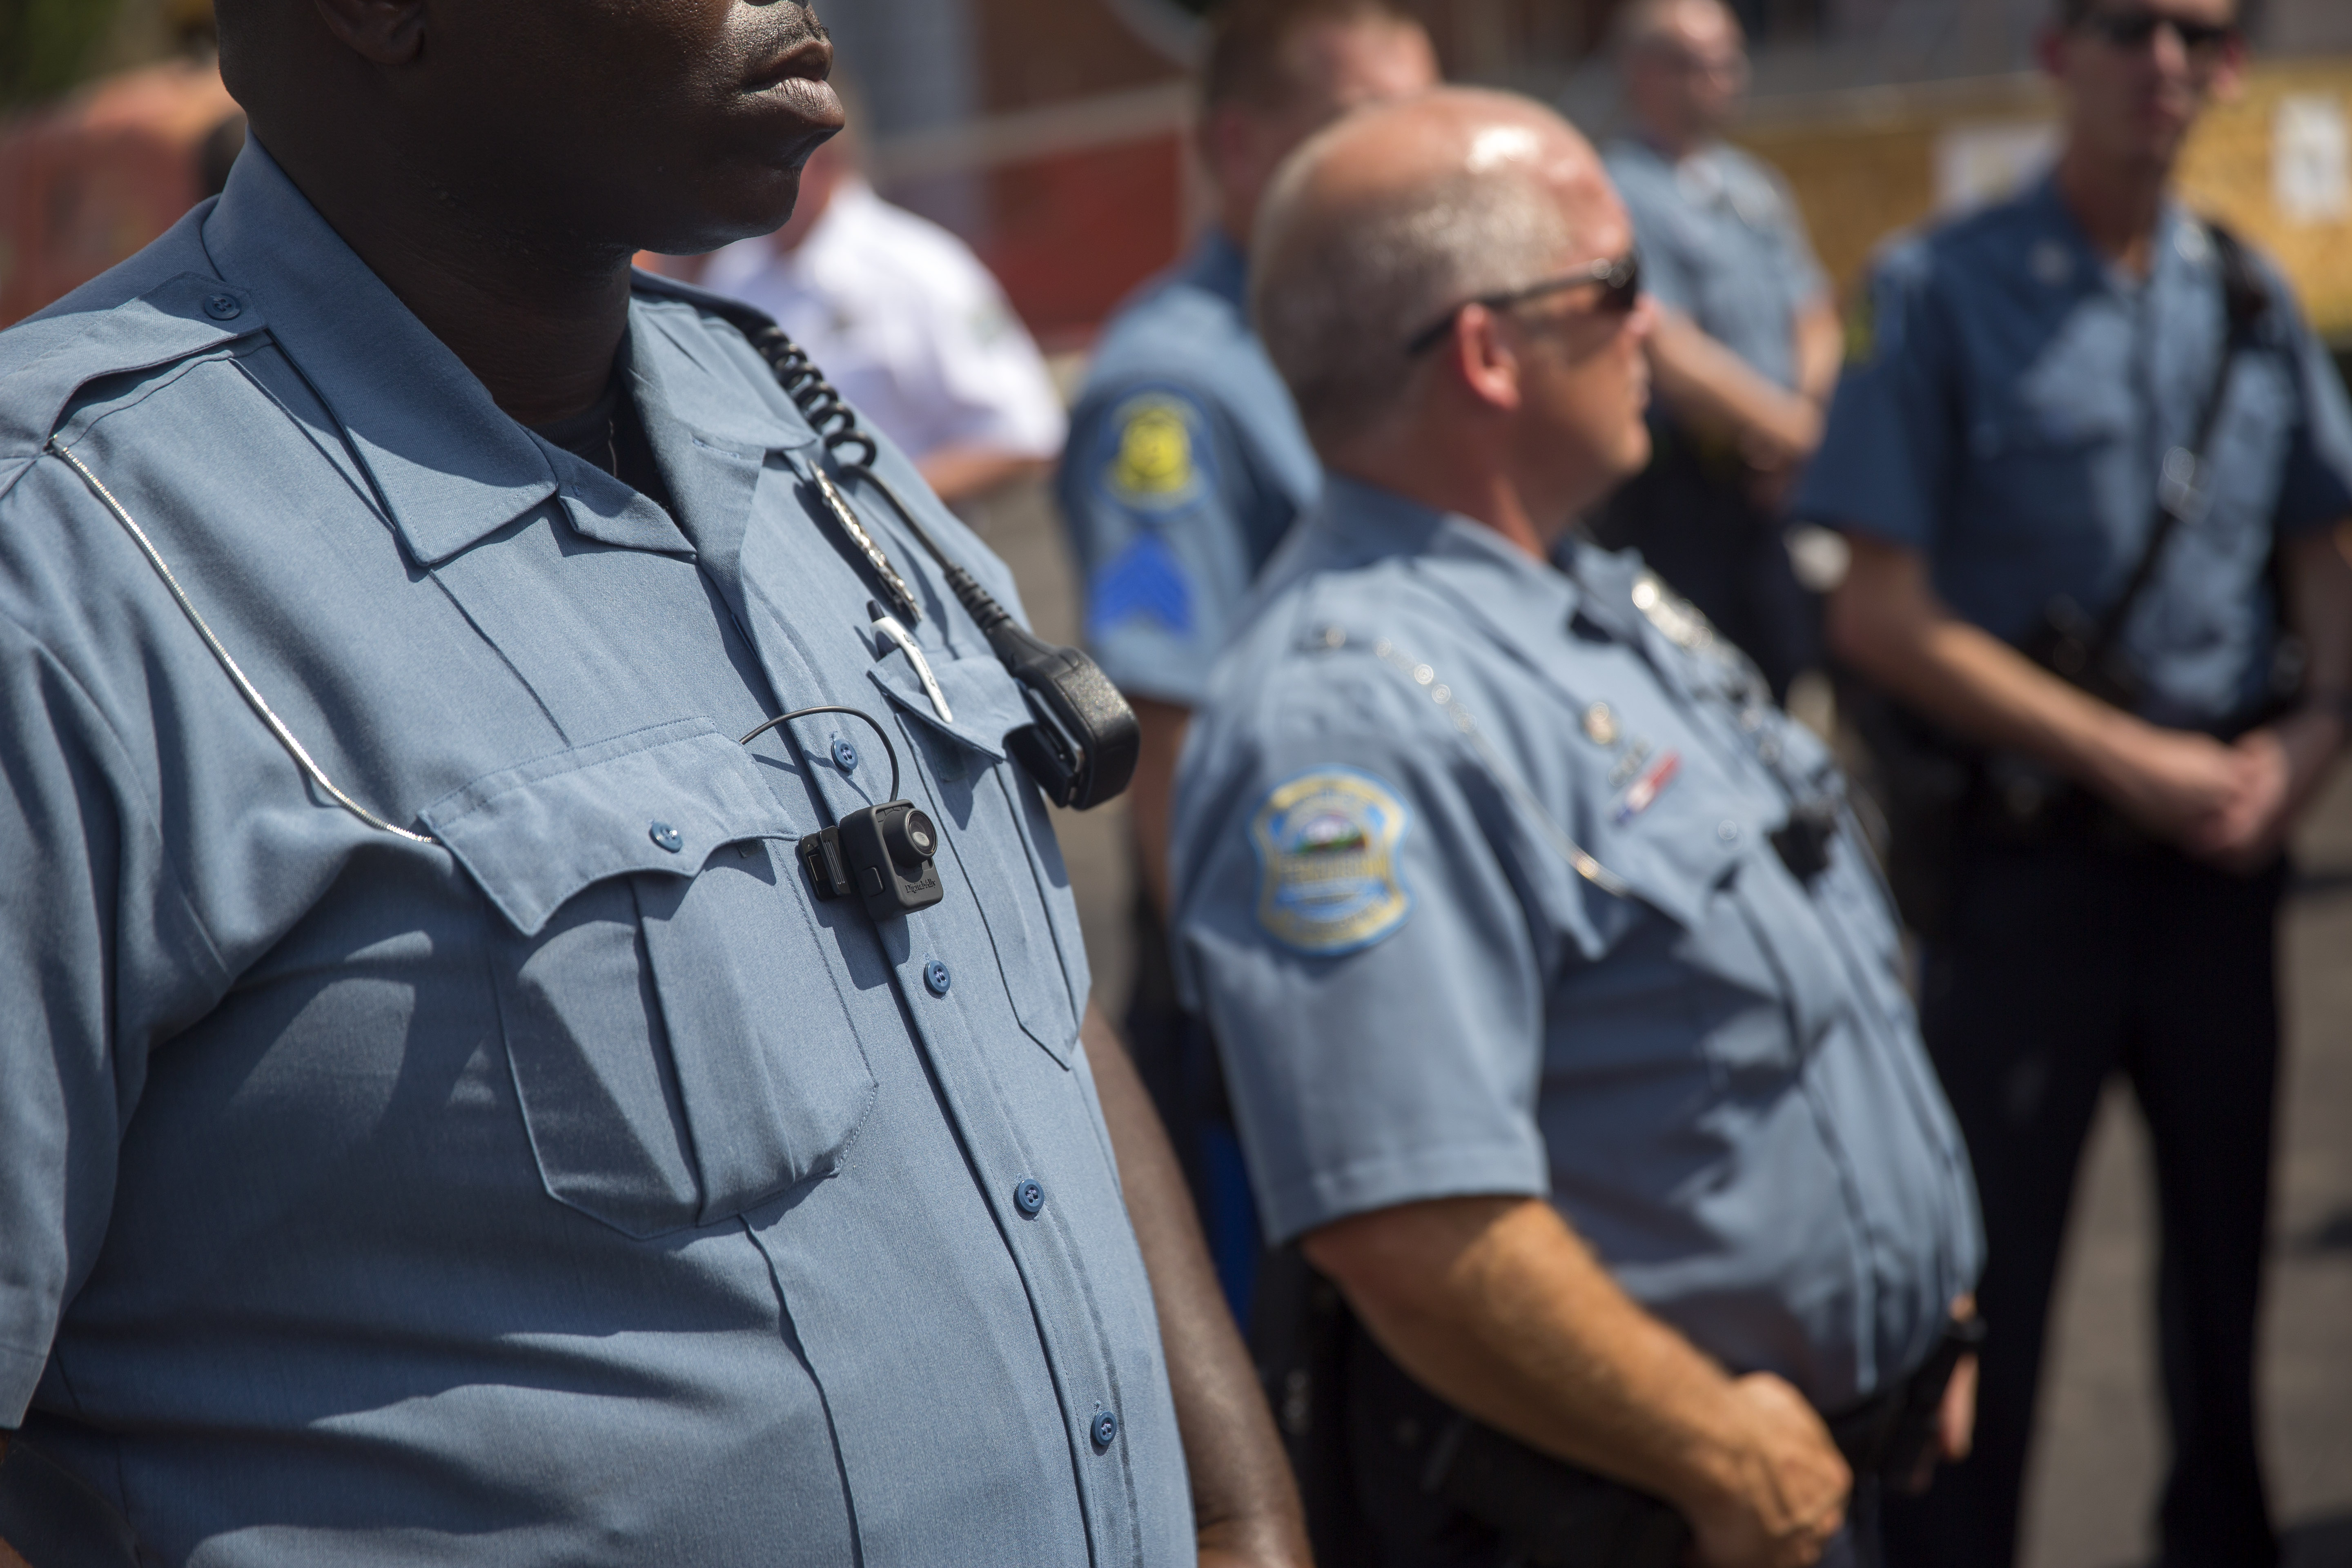 Members of the Ferguson Police Department wear body cameras during a rally on Aug. 30, 2014, in Ferguson. Like a number of departments around the U.S., Ferguson police began using  the wearable cameras after Michael Brown was killed. There are no video recordings of the incident involving Brown and officer Darren Wilson.